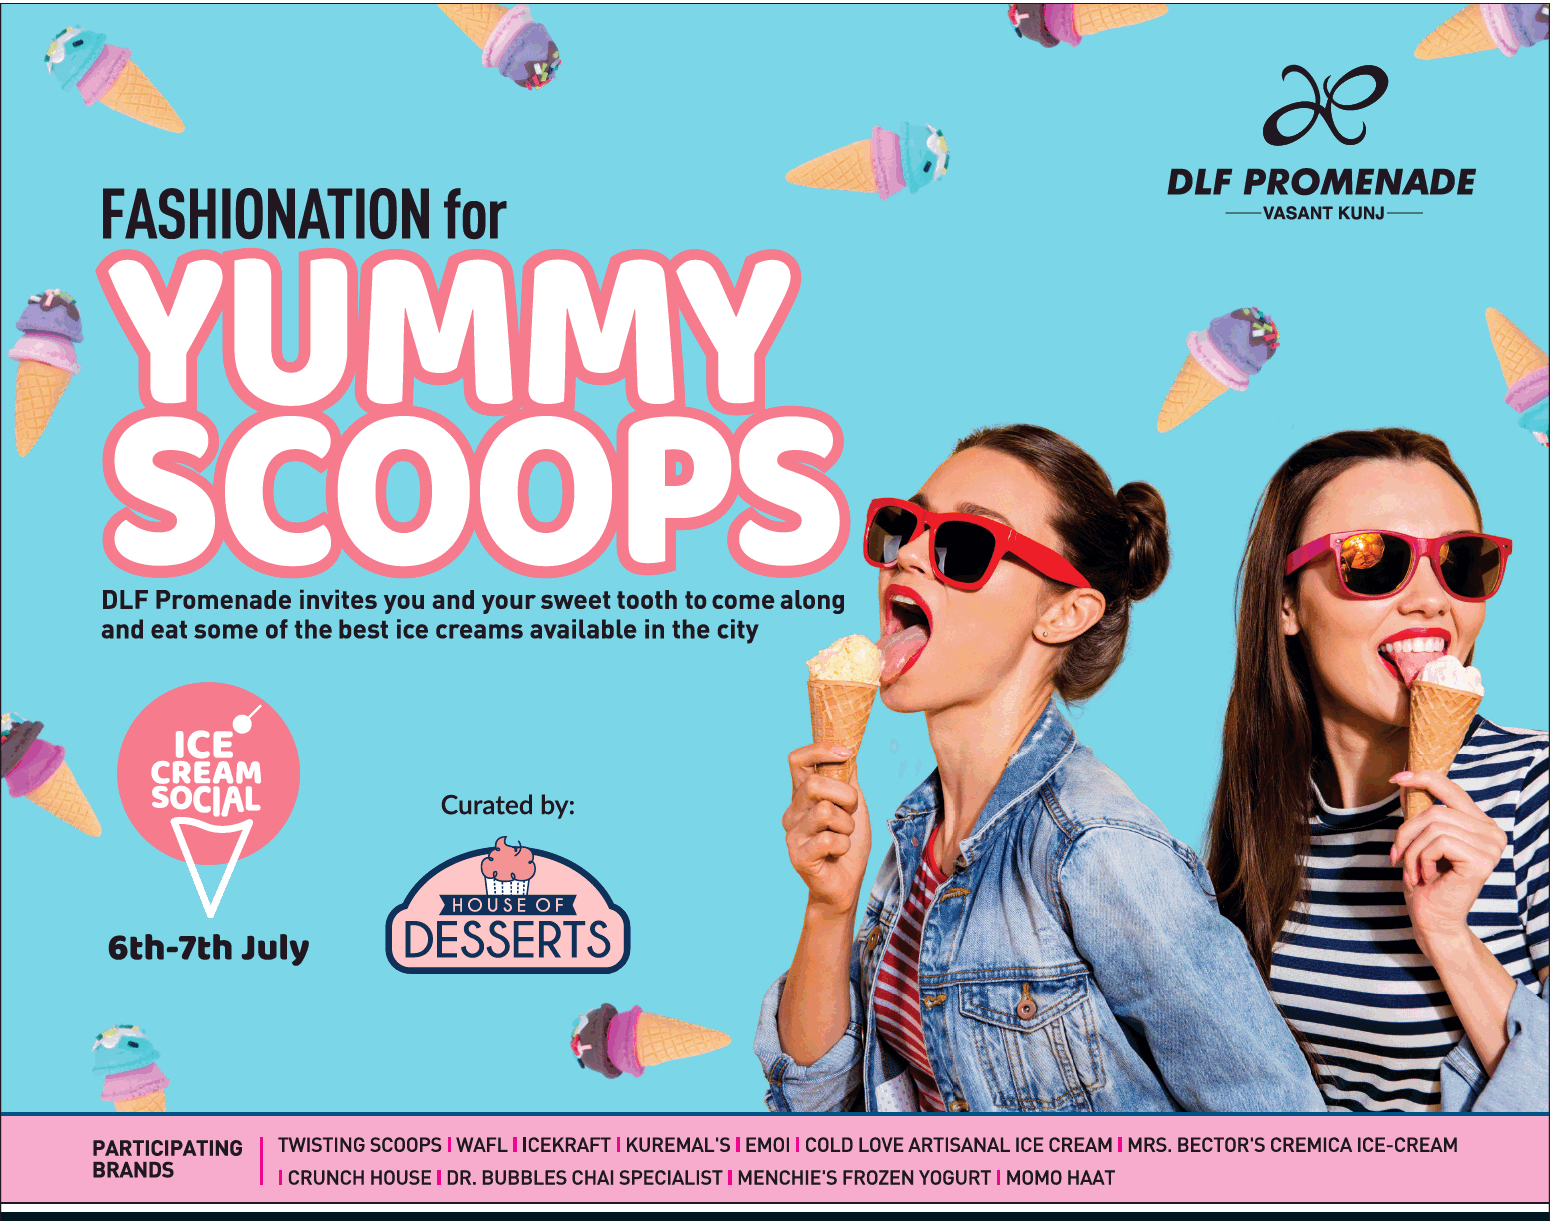 dlf-promenade-fashionation-yummy-scoops-house-of-desserts-ad-times-of-india-delhi-06-07-2019.png